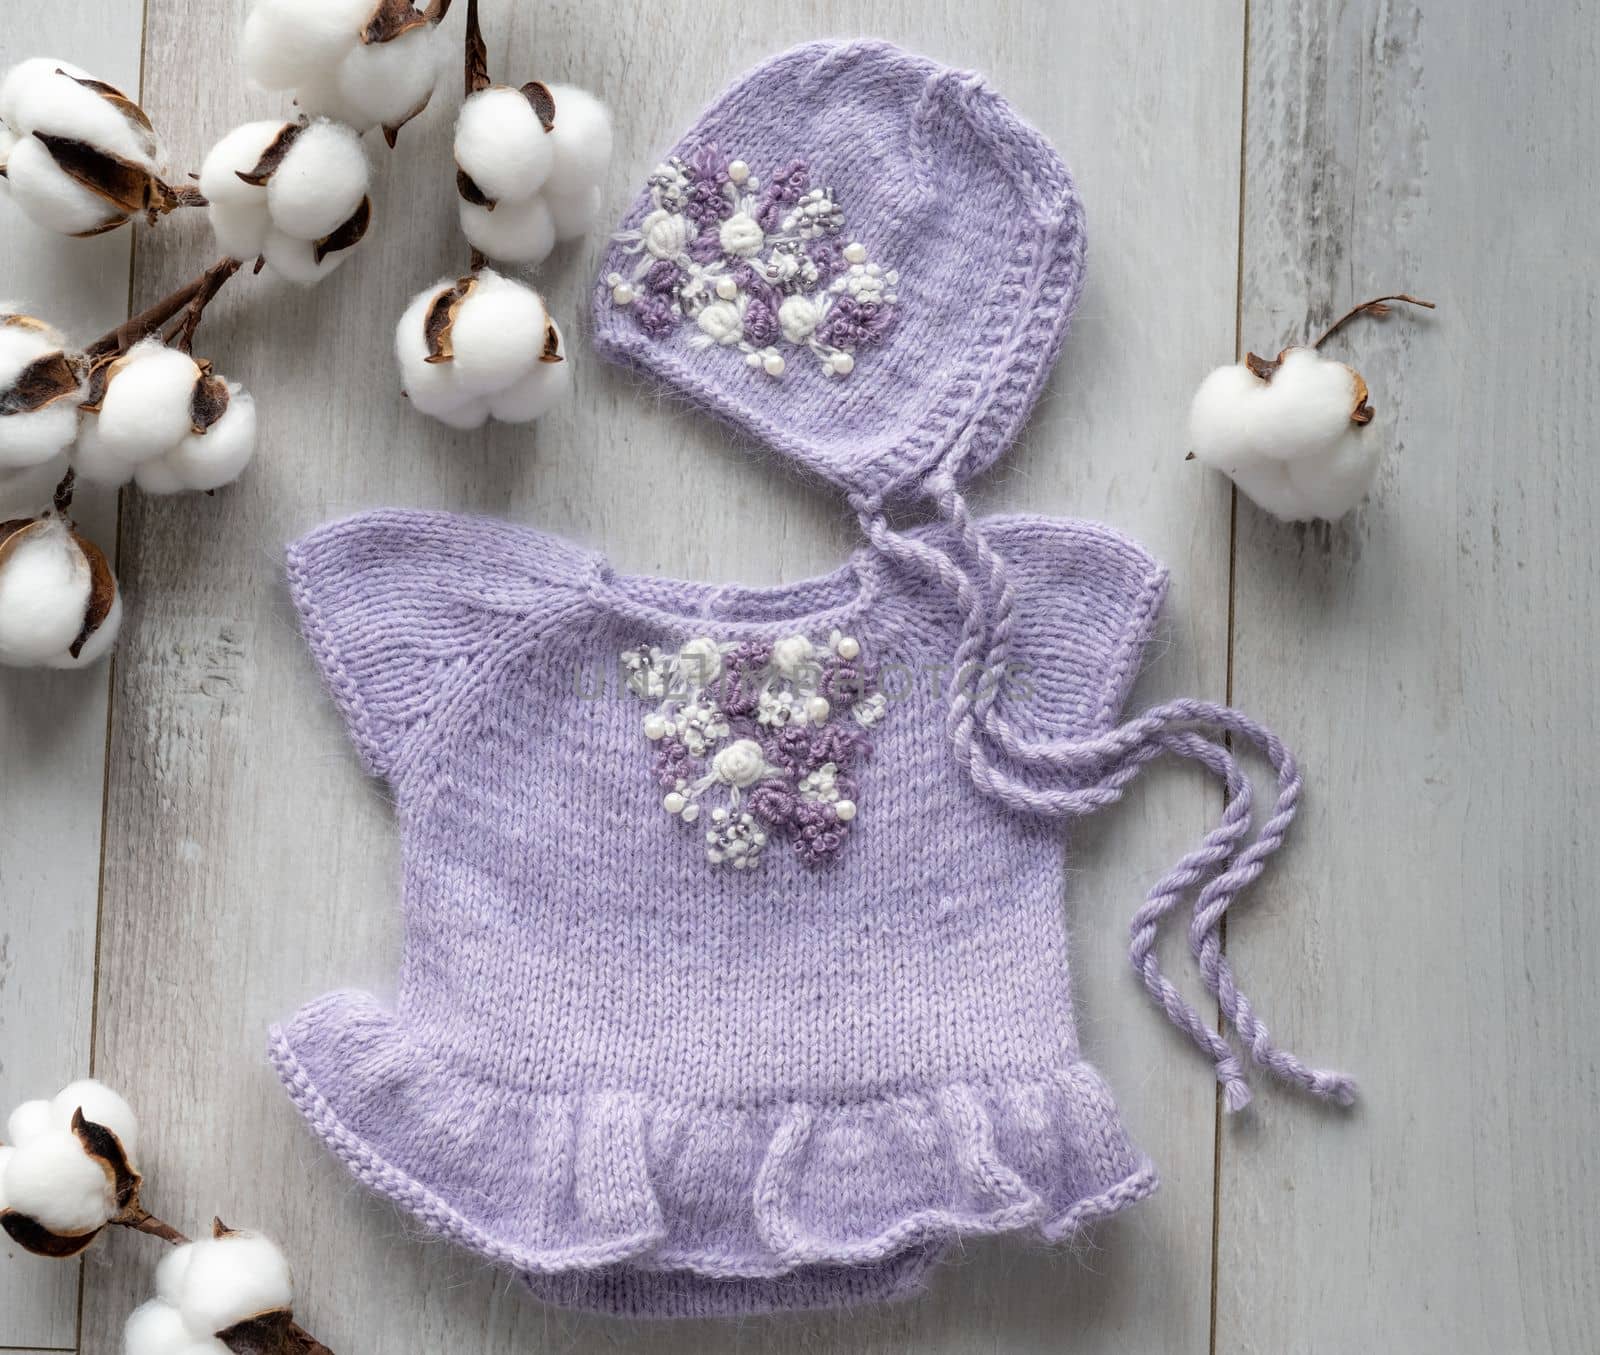 knitted newborn baby clothes by tan4ikk1